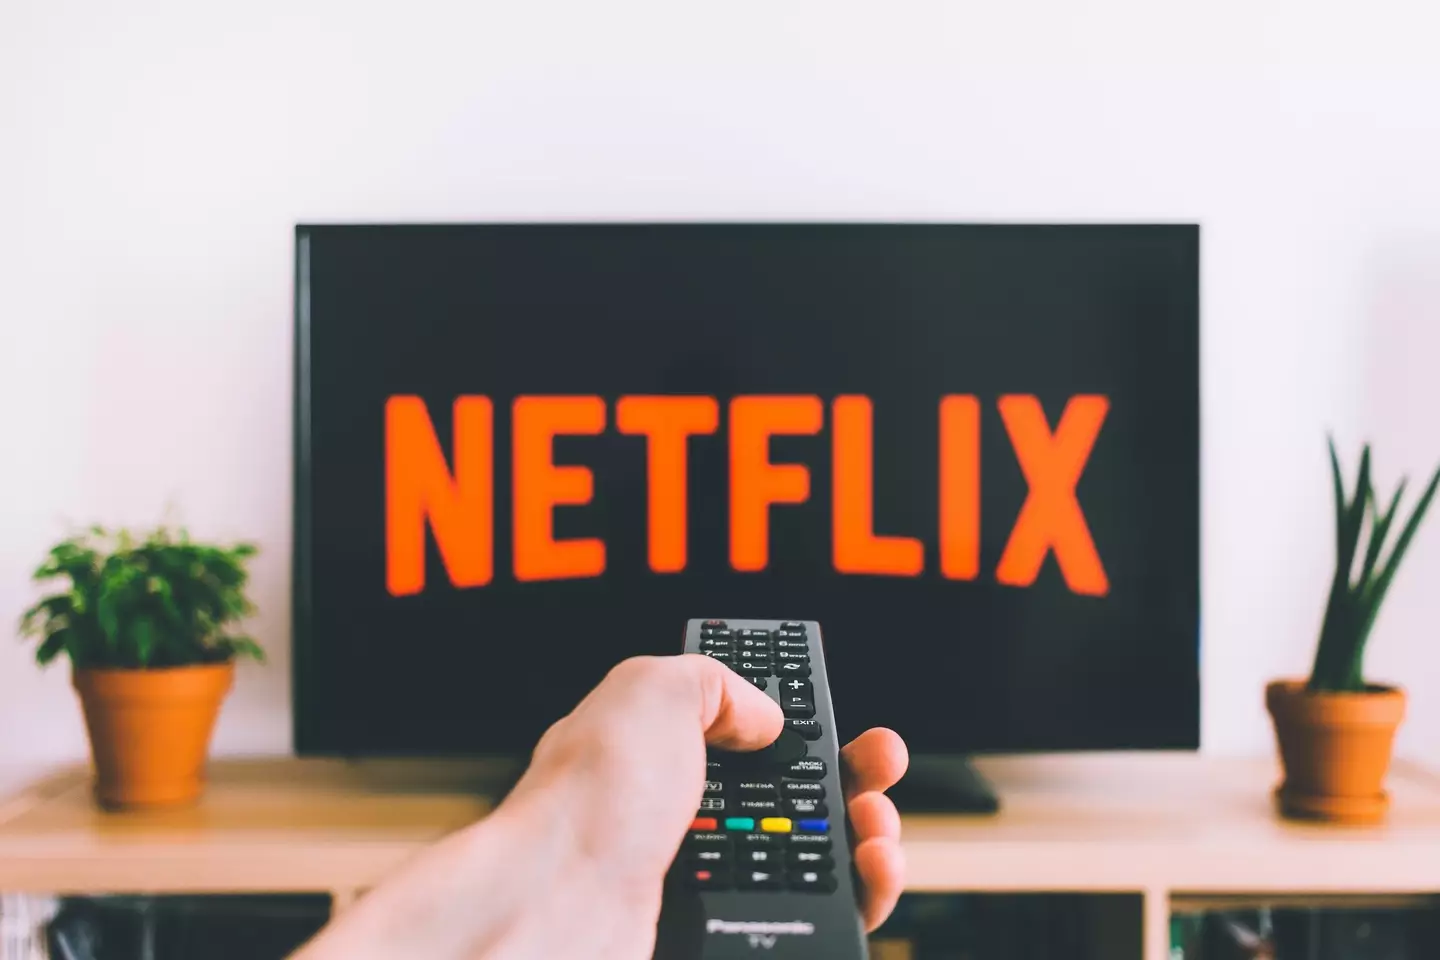 Netflix is cracking down on password sharing. (